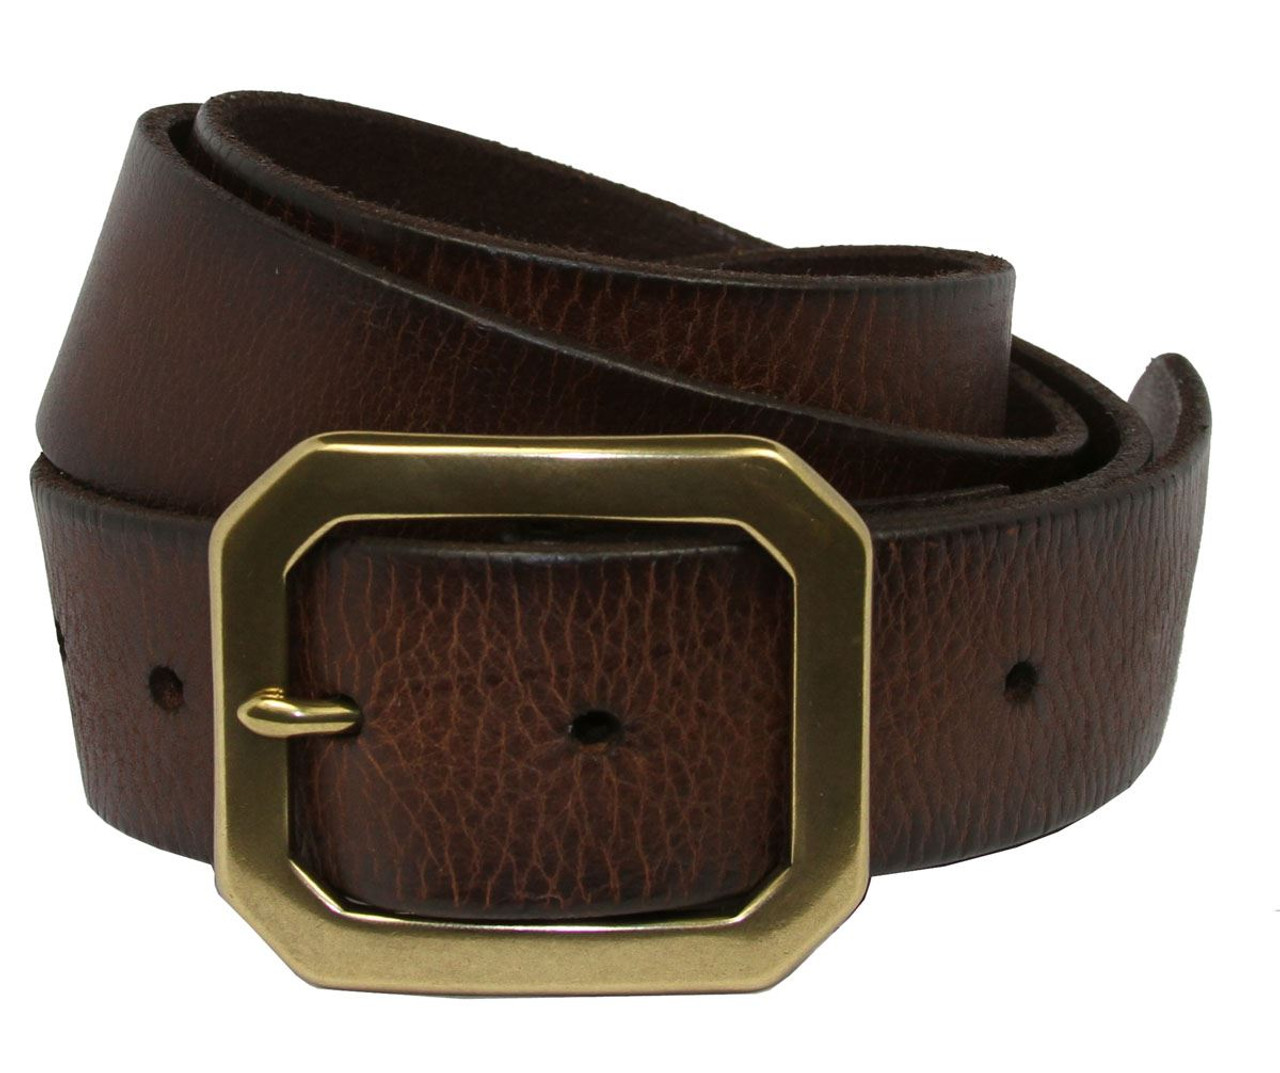 New Retro Smooth Buckle Belt Men's Oversized Leather Pure